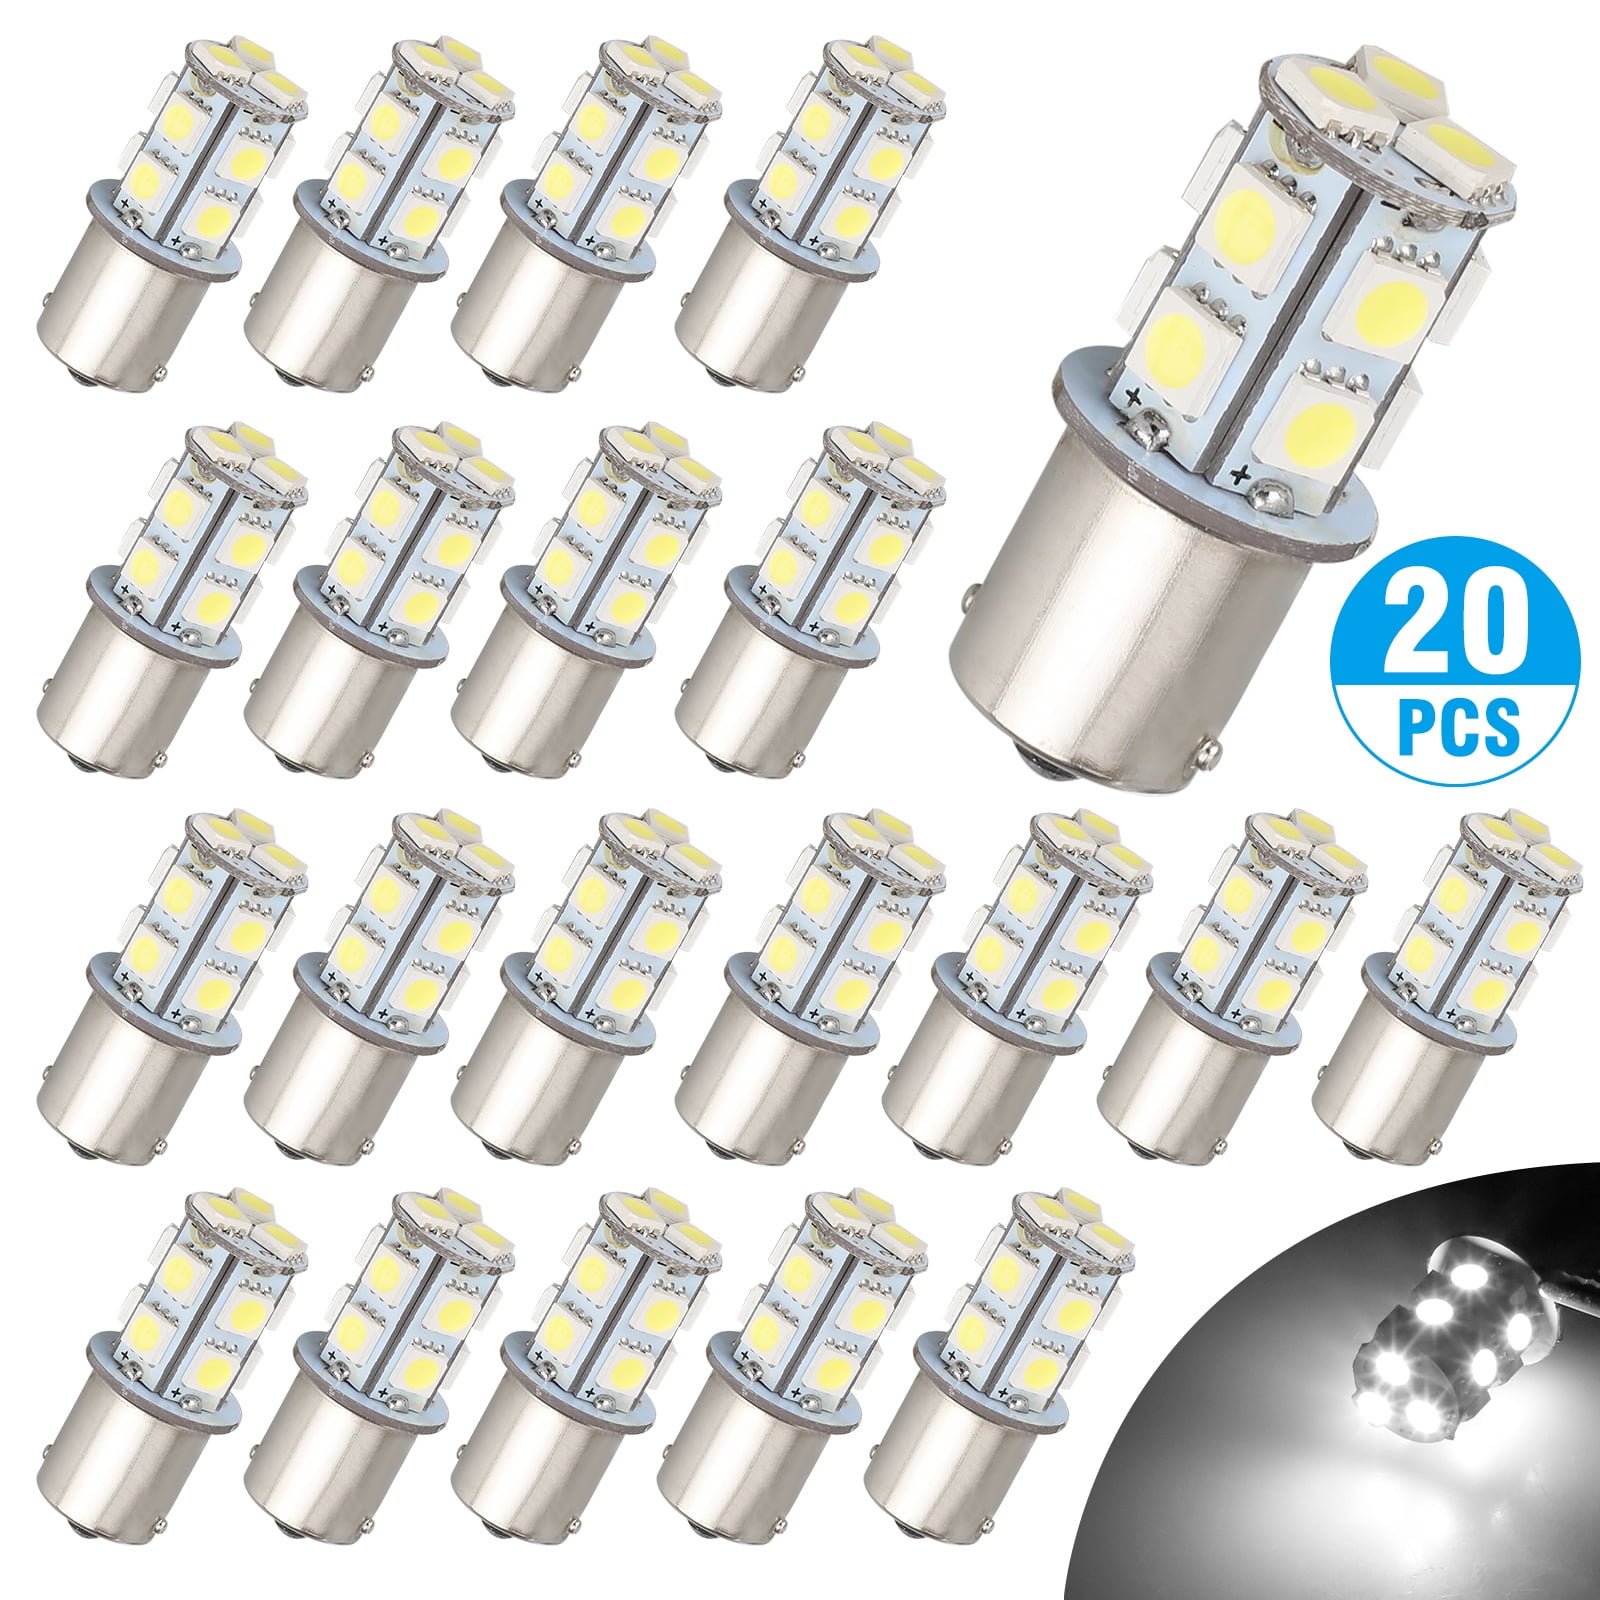 Pack of 8 UNXMRFF Super Bright 1156 BA15S 1141 1003 1073 7506 LED Bulbs Warm White 5050 18-SMD Replacement Lamps For 12V RV Interior Ceiling Dome Light/Travel Trailer/Camper/Boat Yard Light Bulbs 